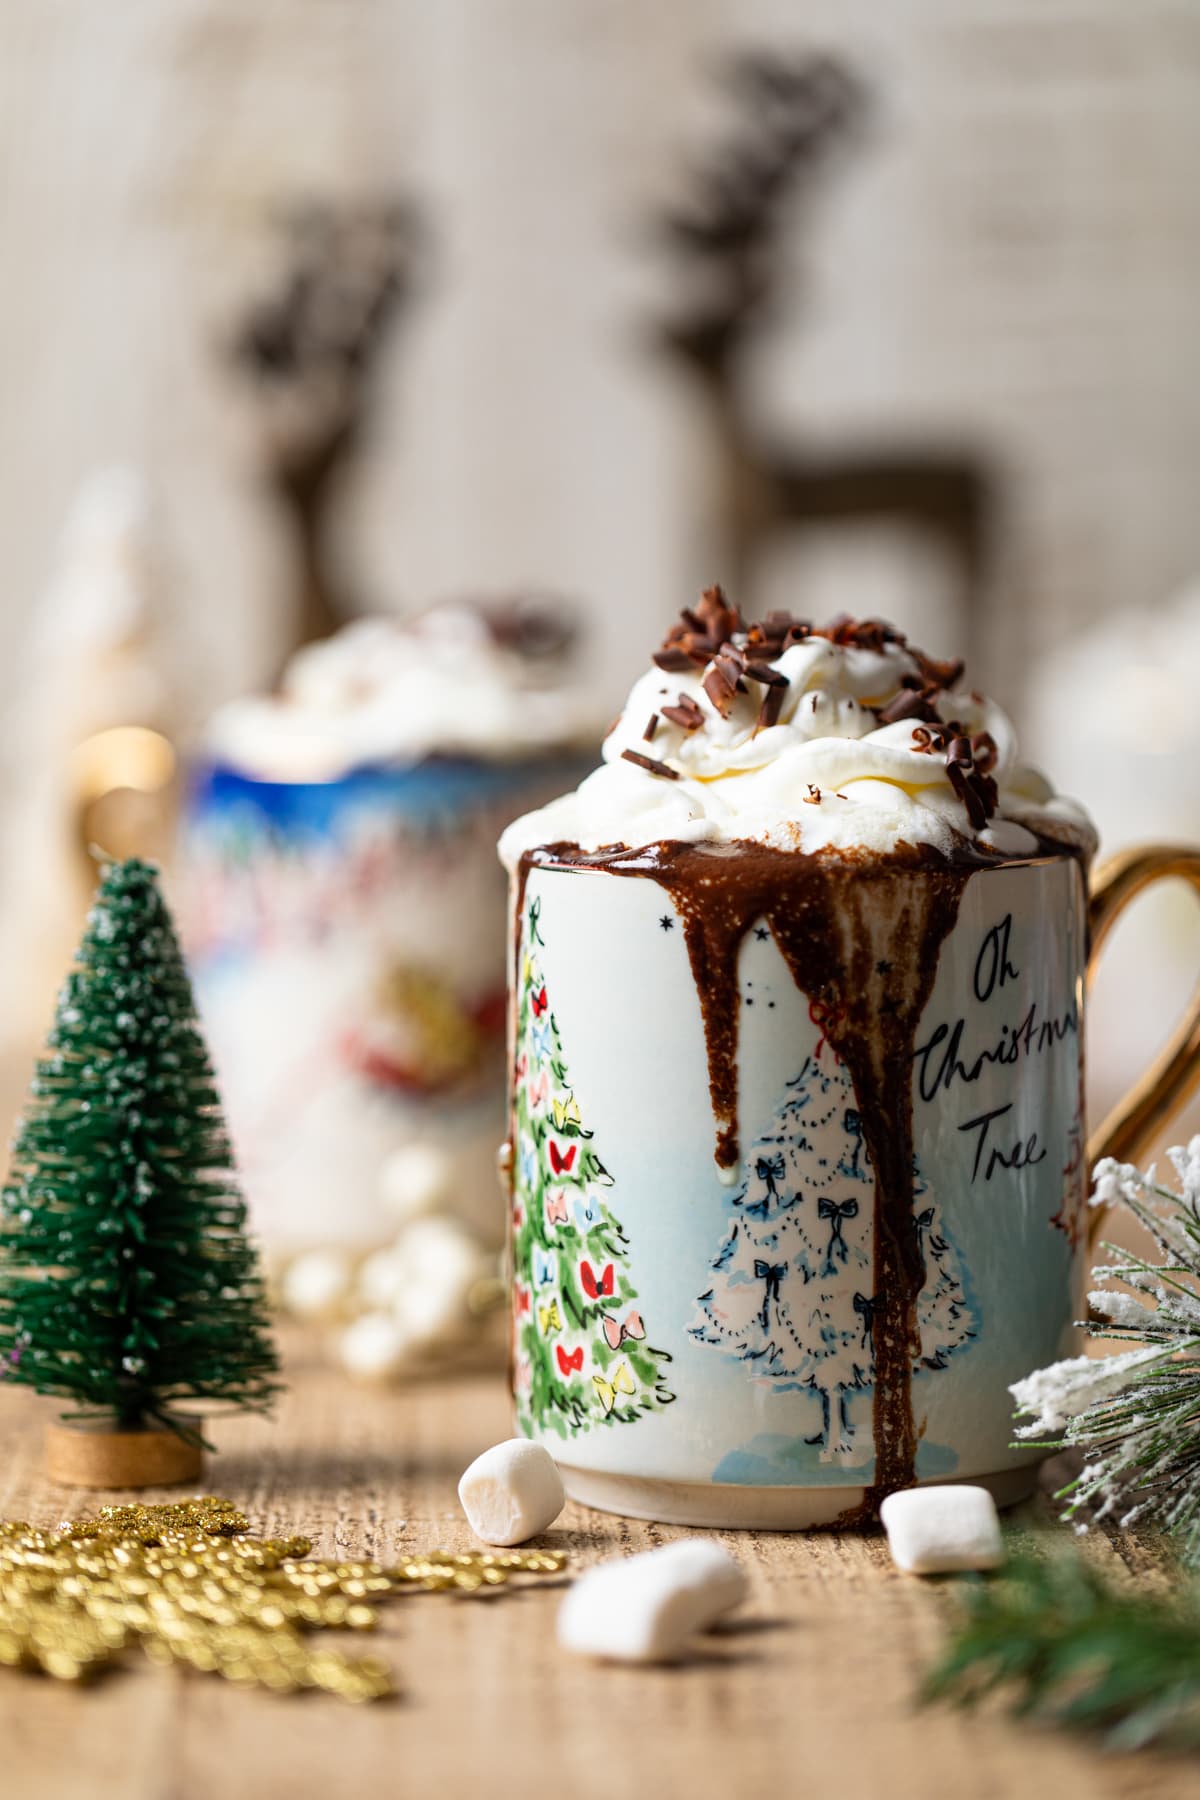 Mug of Creamy Caramel Hot Chocolate on a table with Christmas decorations